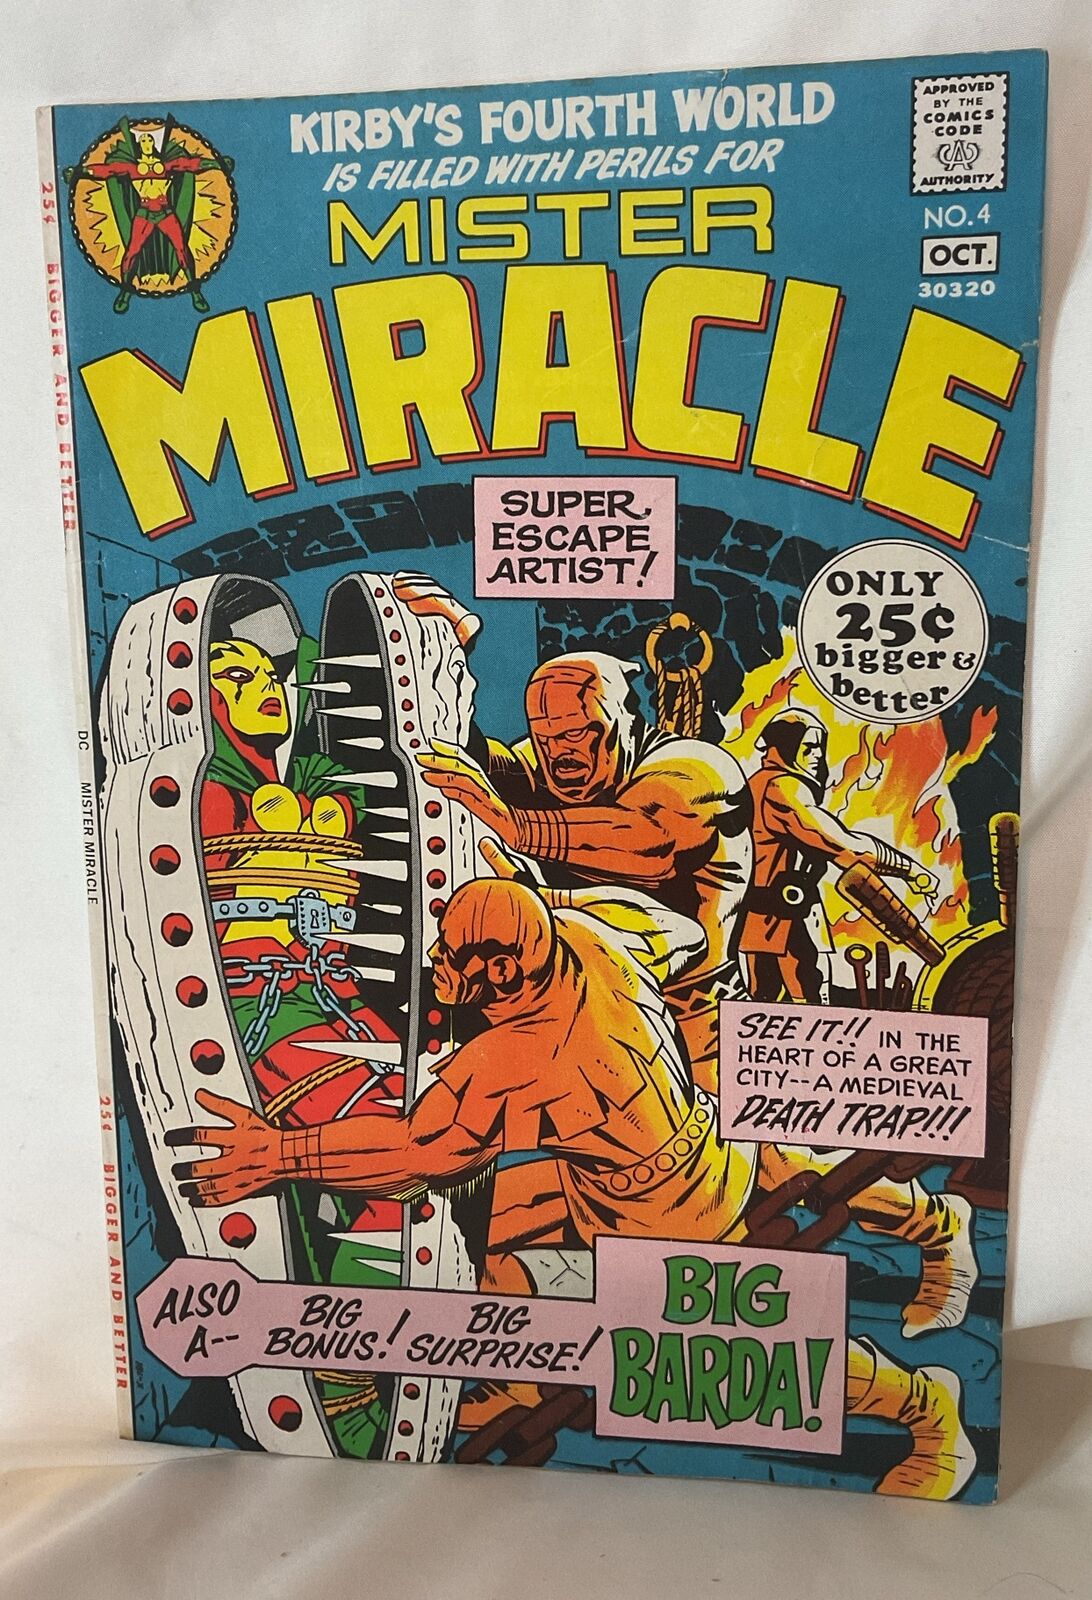 MISTER MIRACLE #4 1st appearance of Big Barda 1971. Comic Kirby”s 4 Th World